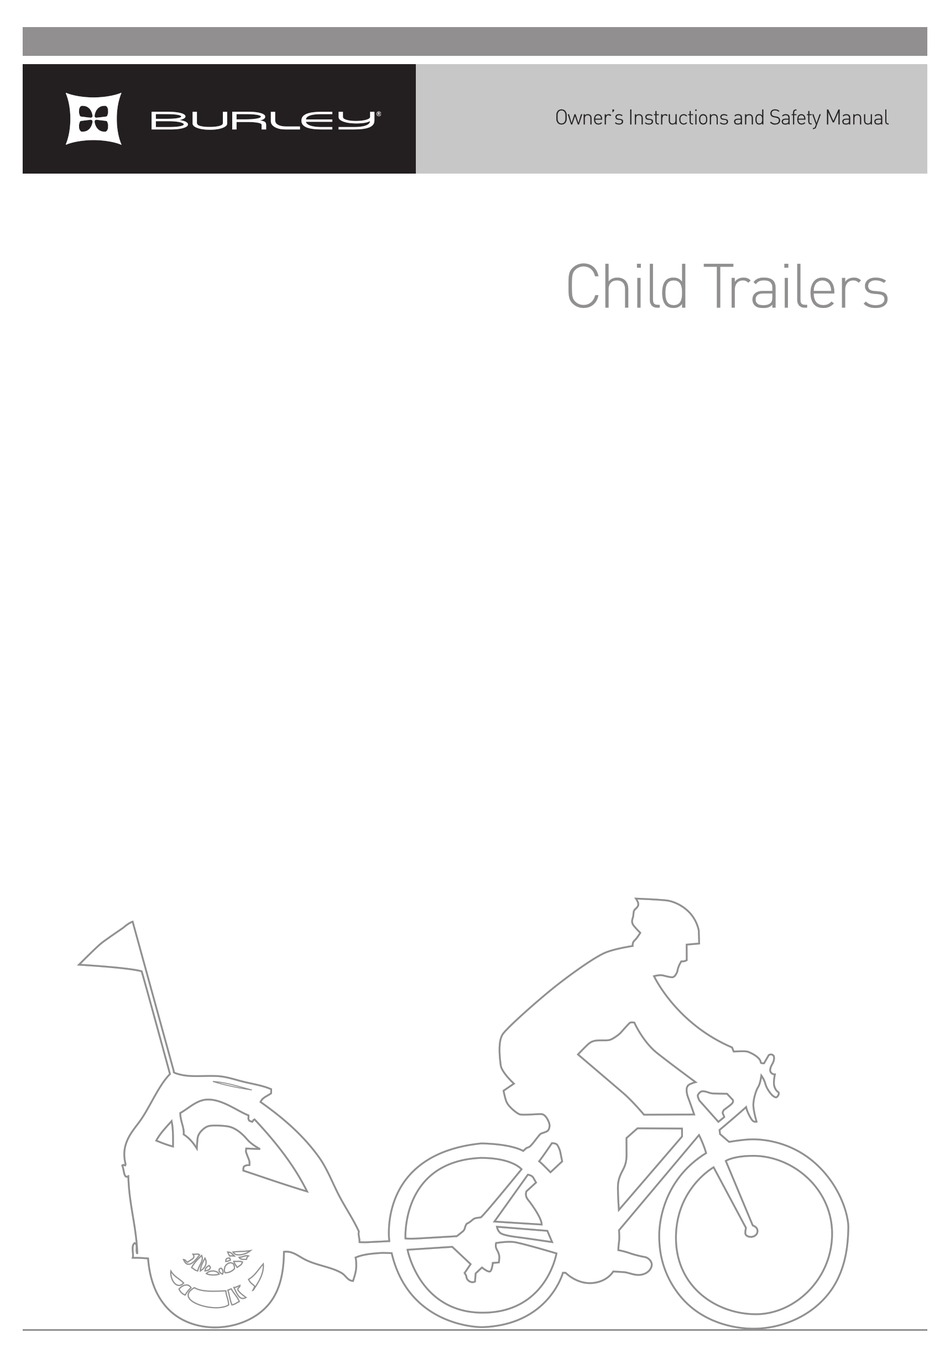 BURLEY CHILD TRAILERS OWNER'S INSTRUCTION AND SAFETY MANUAL Pdf